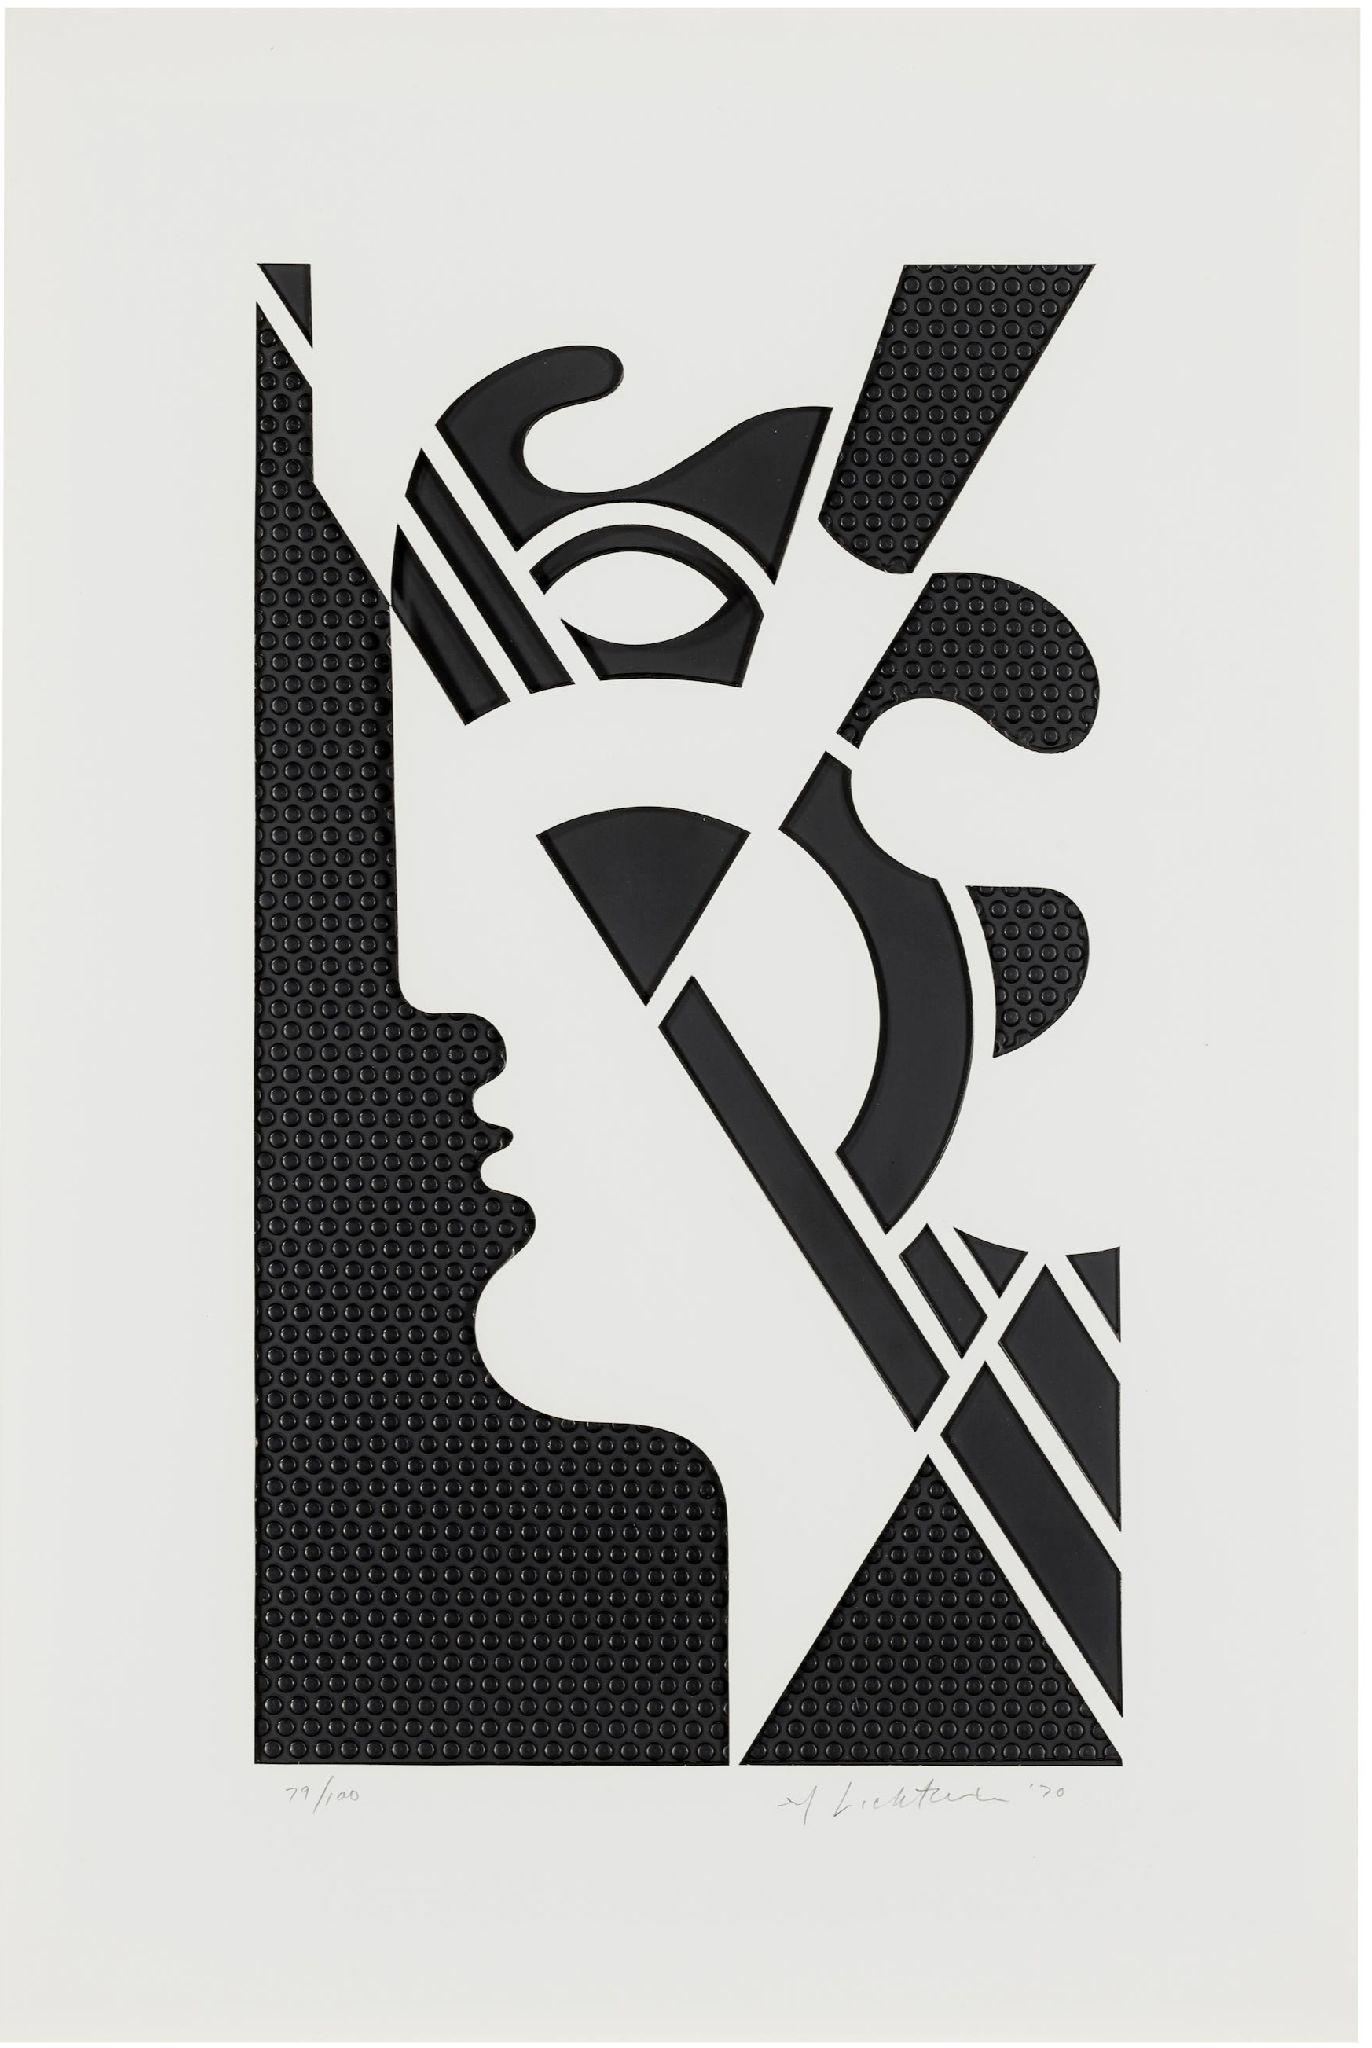 Modern Head #5
1970
Embossed graphite with Strathmore die-cut paper overlay, mounted in white lacquered aluminum frame with wooden stretcher support
Signed, dated, and numbered in pencil
Publisher: Gemini G.E.L., Los Angeles
Corlett 95